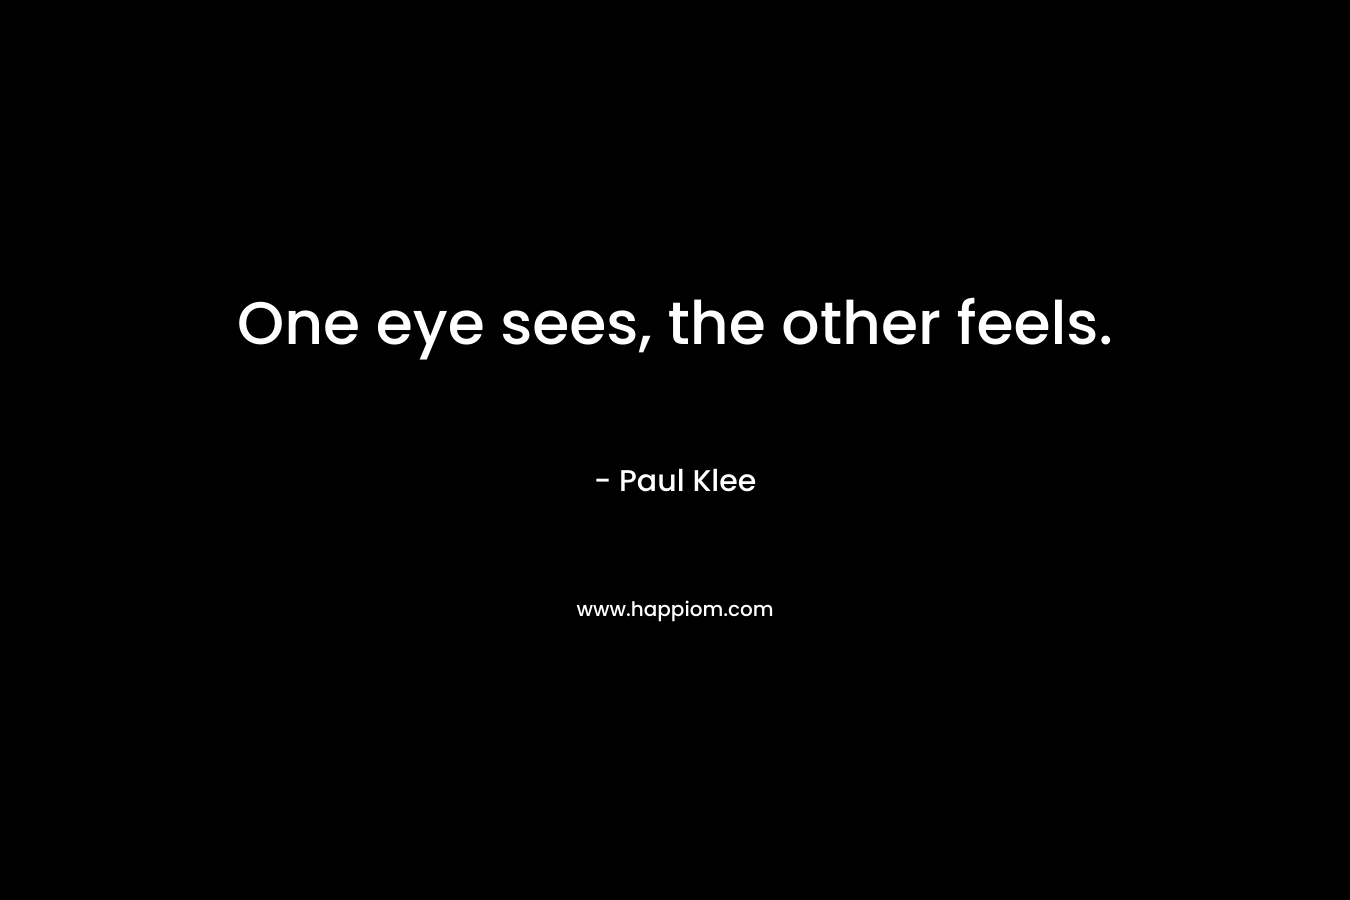 One eye sees, the other feels. – Paul Klee